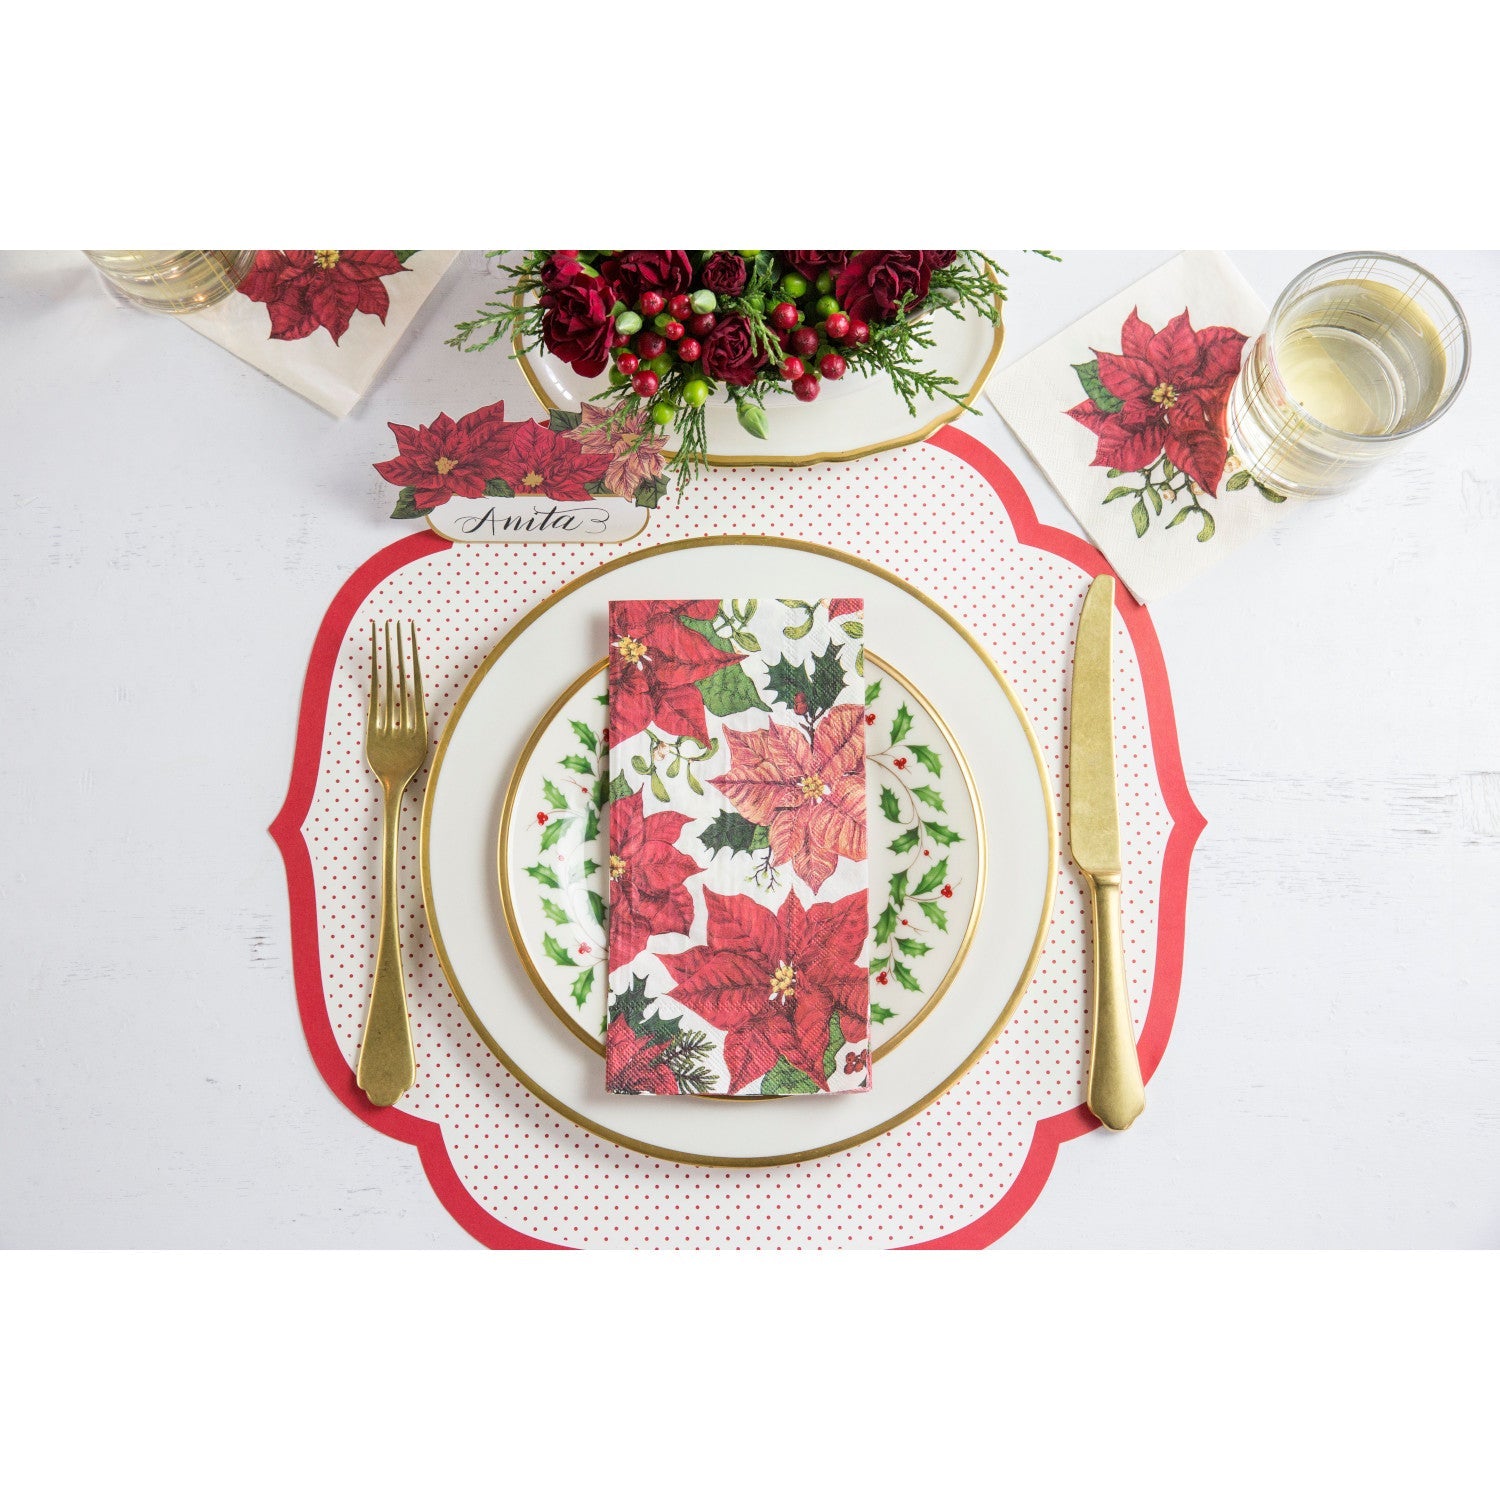 A festive Christmas place setting featuring a Poinsettia Guest Napkin centered on the plate, from above.